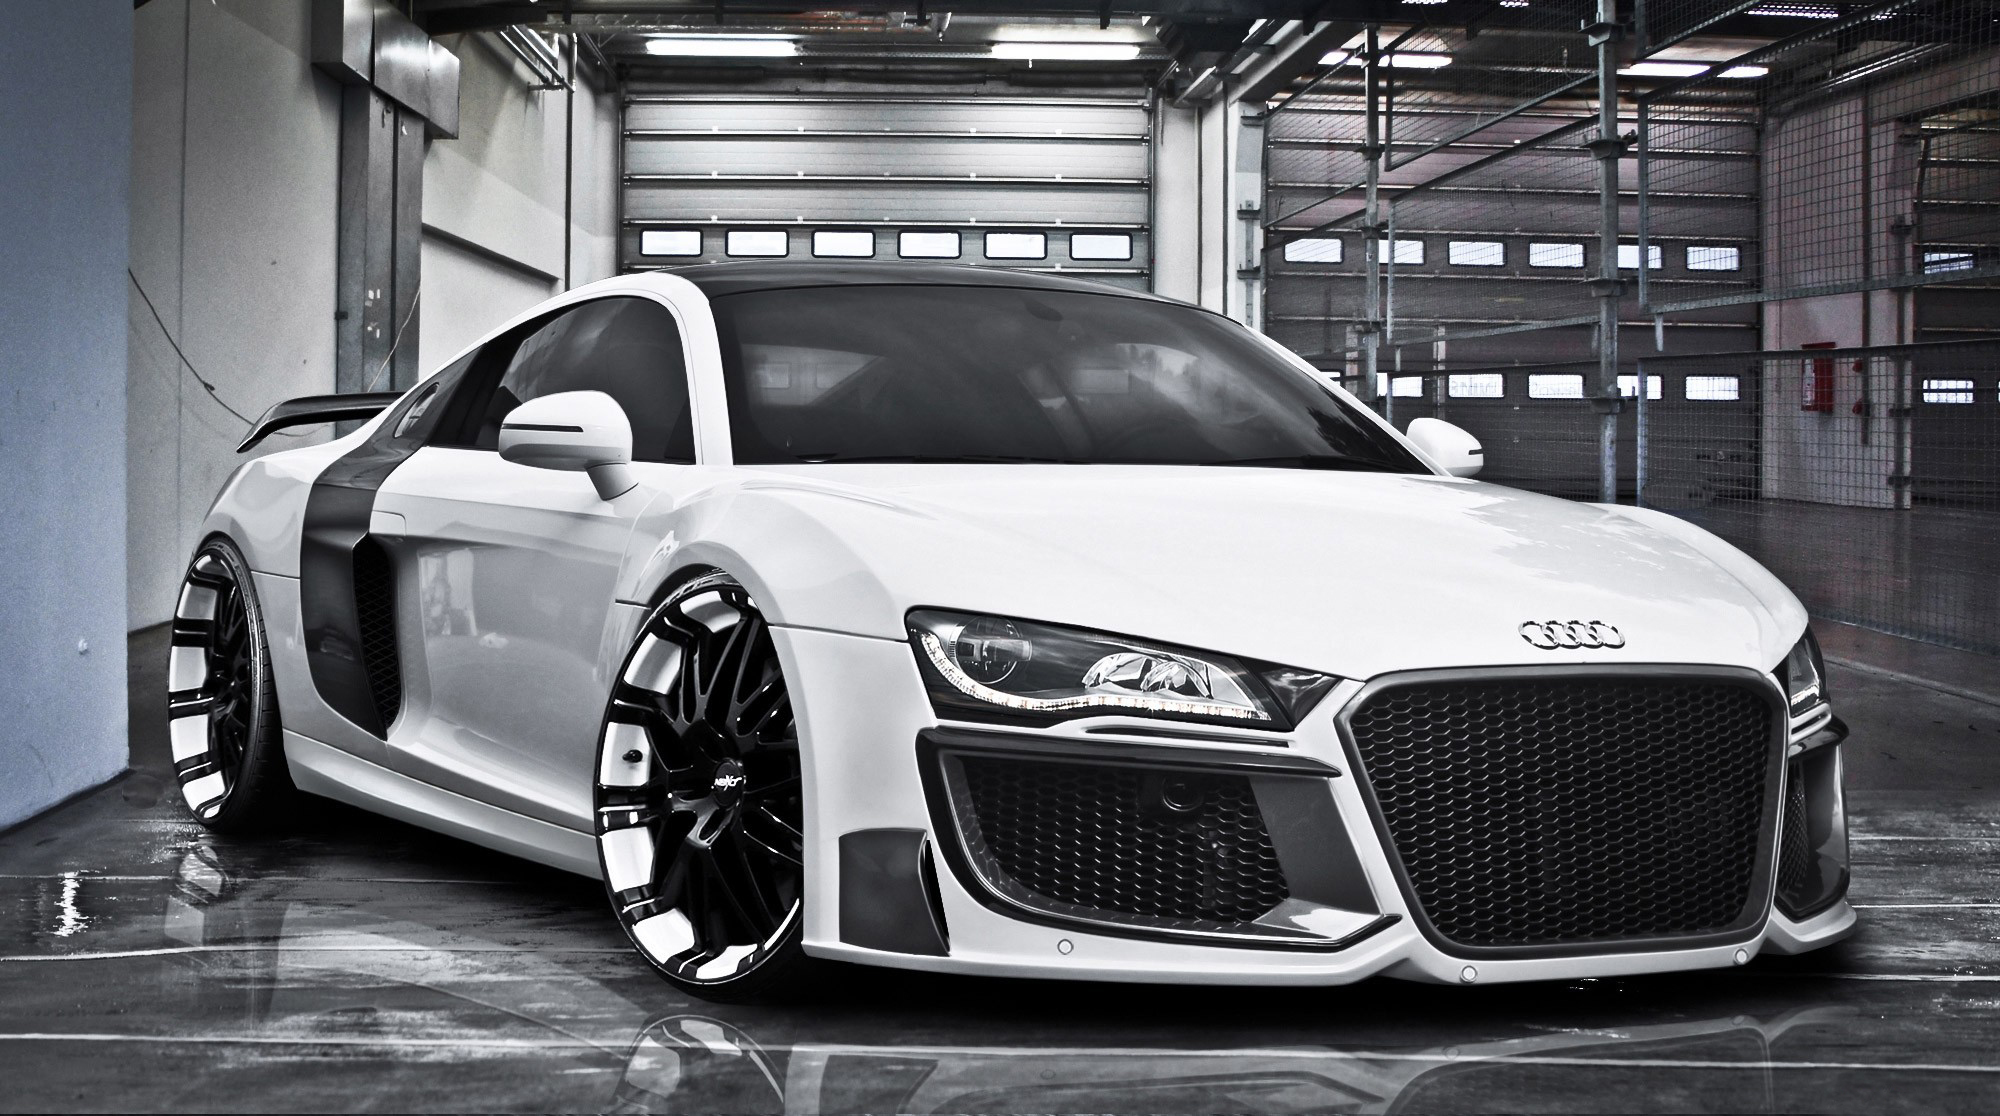 126422 download wallpaper audi, cars, r8, regula tuning, oxigin oxrock, r20 screensavers and pictures for free